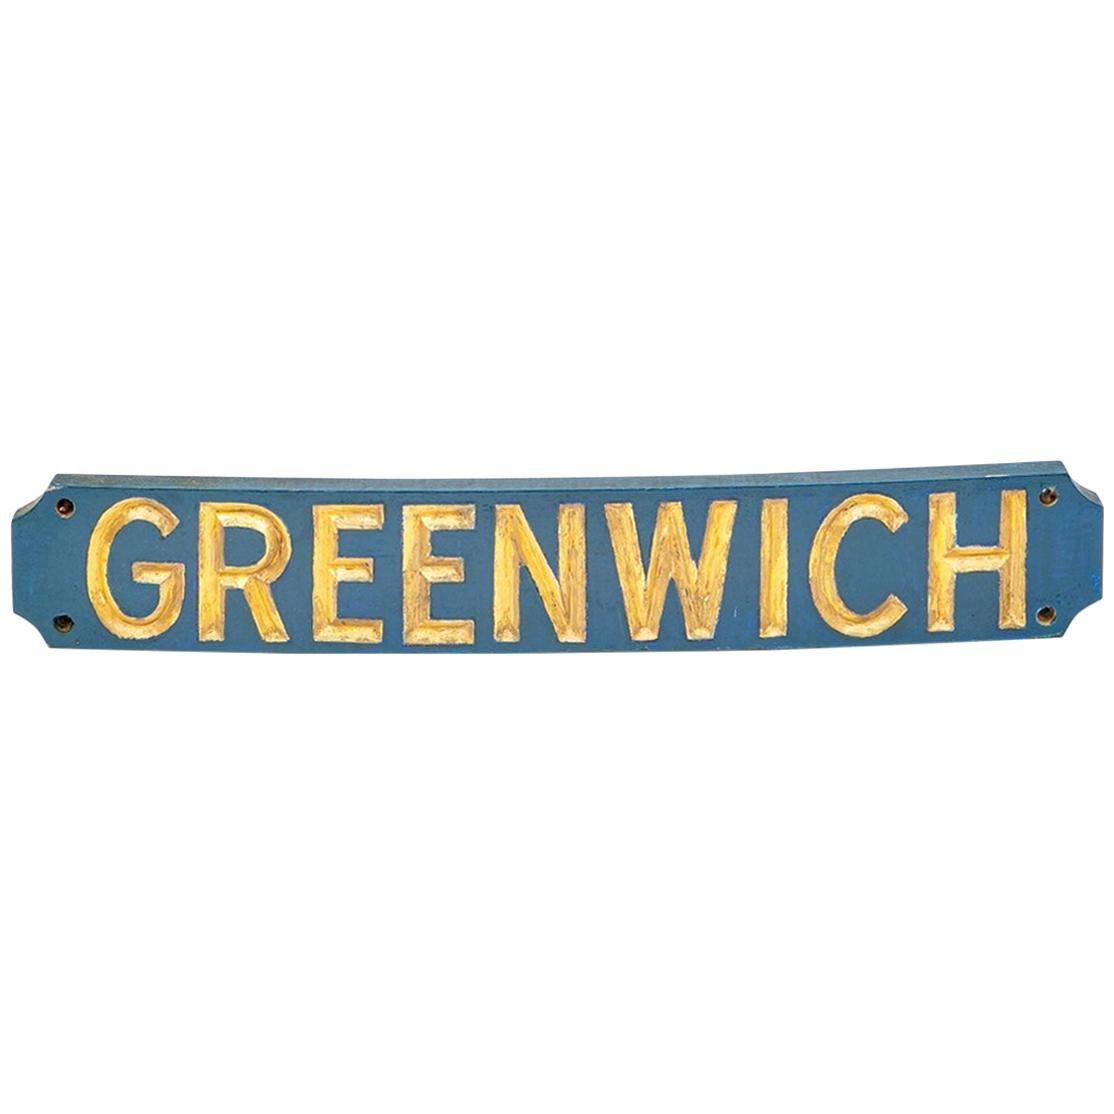 Vintage Painted and Gilt Lettered Greenwich Sign